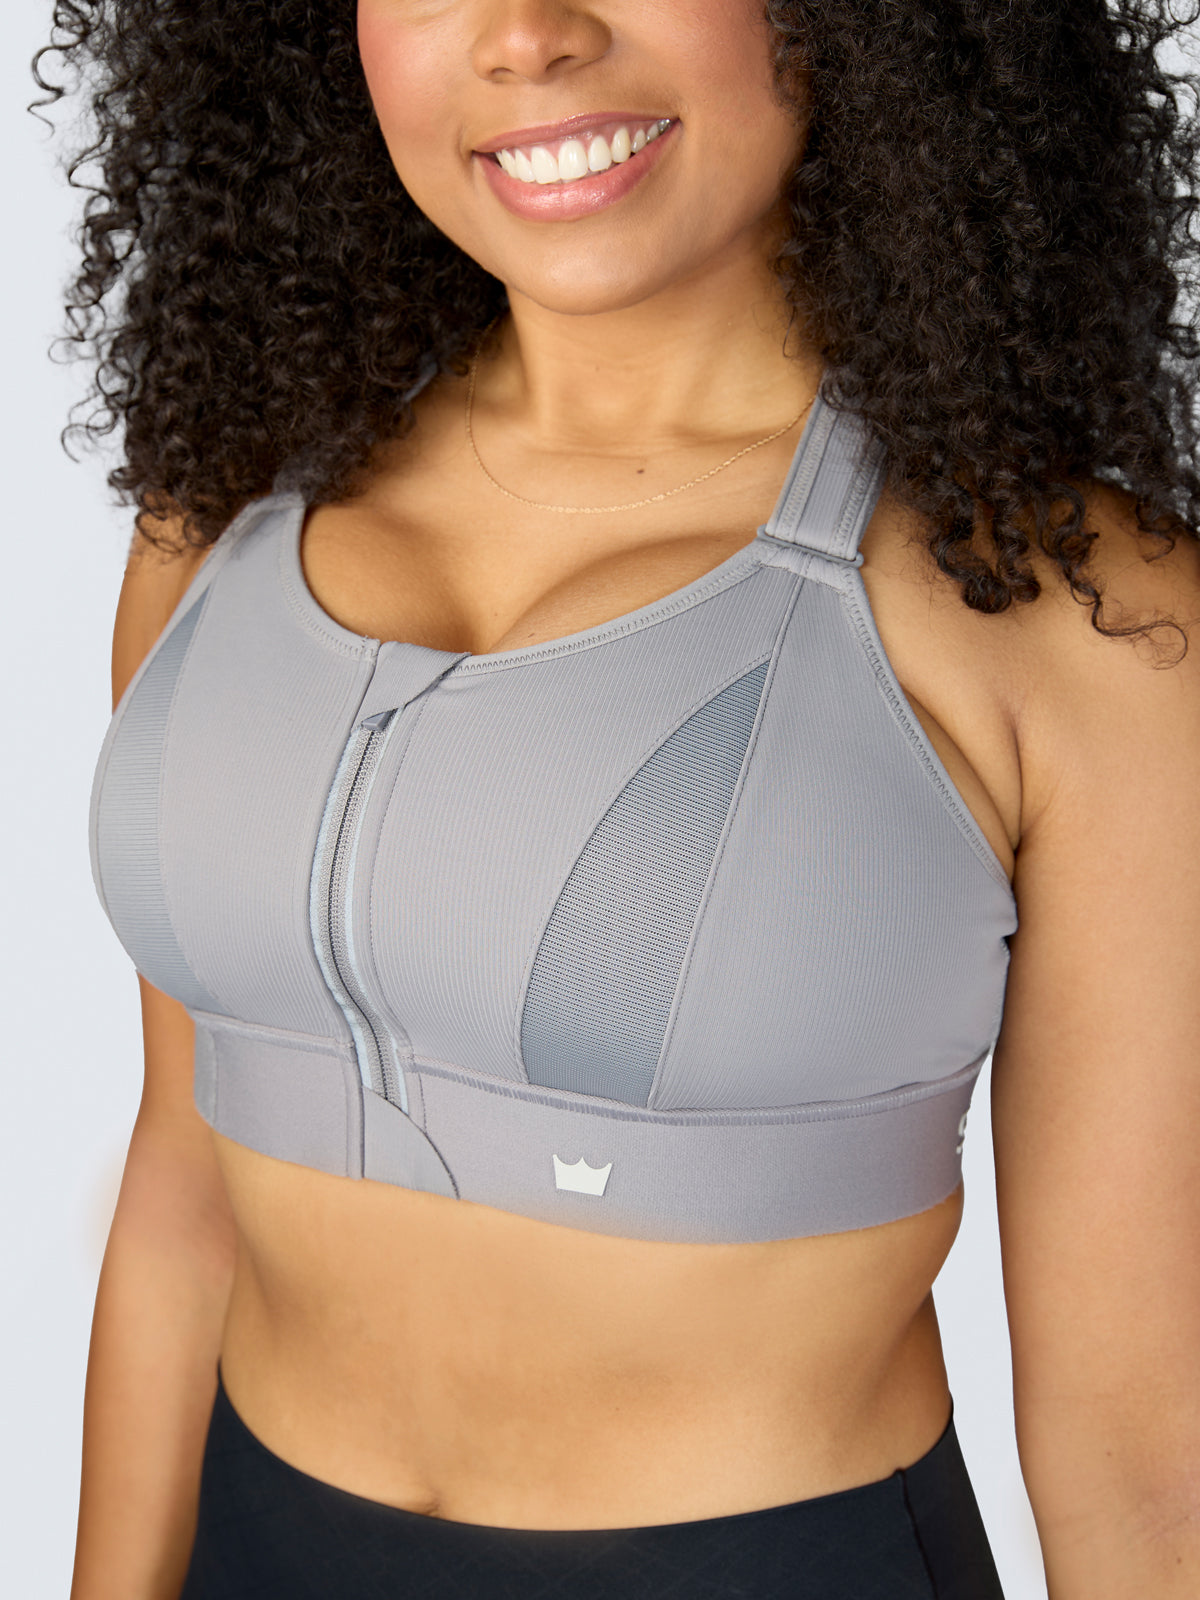 Shefit Ultimate Sports Bra, Just Zip, Cinch and Lift. The Shefit Ultimate Sports  Bra is an adjustable, high-impact sports bra that provides the perfect  comfort and support for any